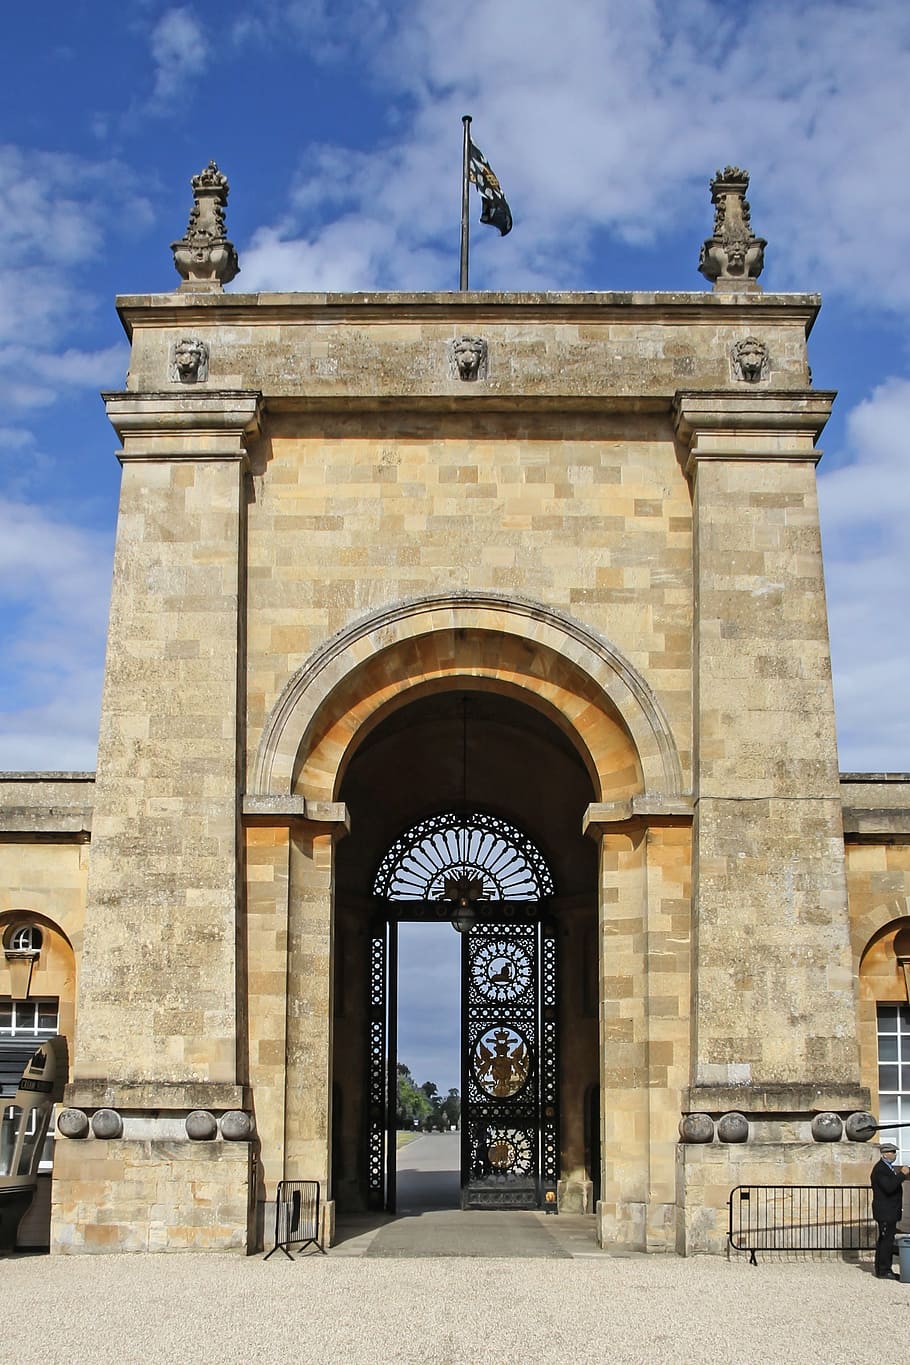 blenheim palace, castle, world heritage, woodstock, oxfordshire, england, architecture, arch, built structure, the past